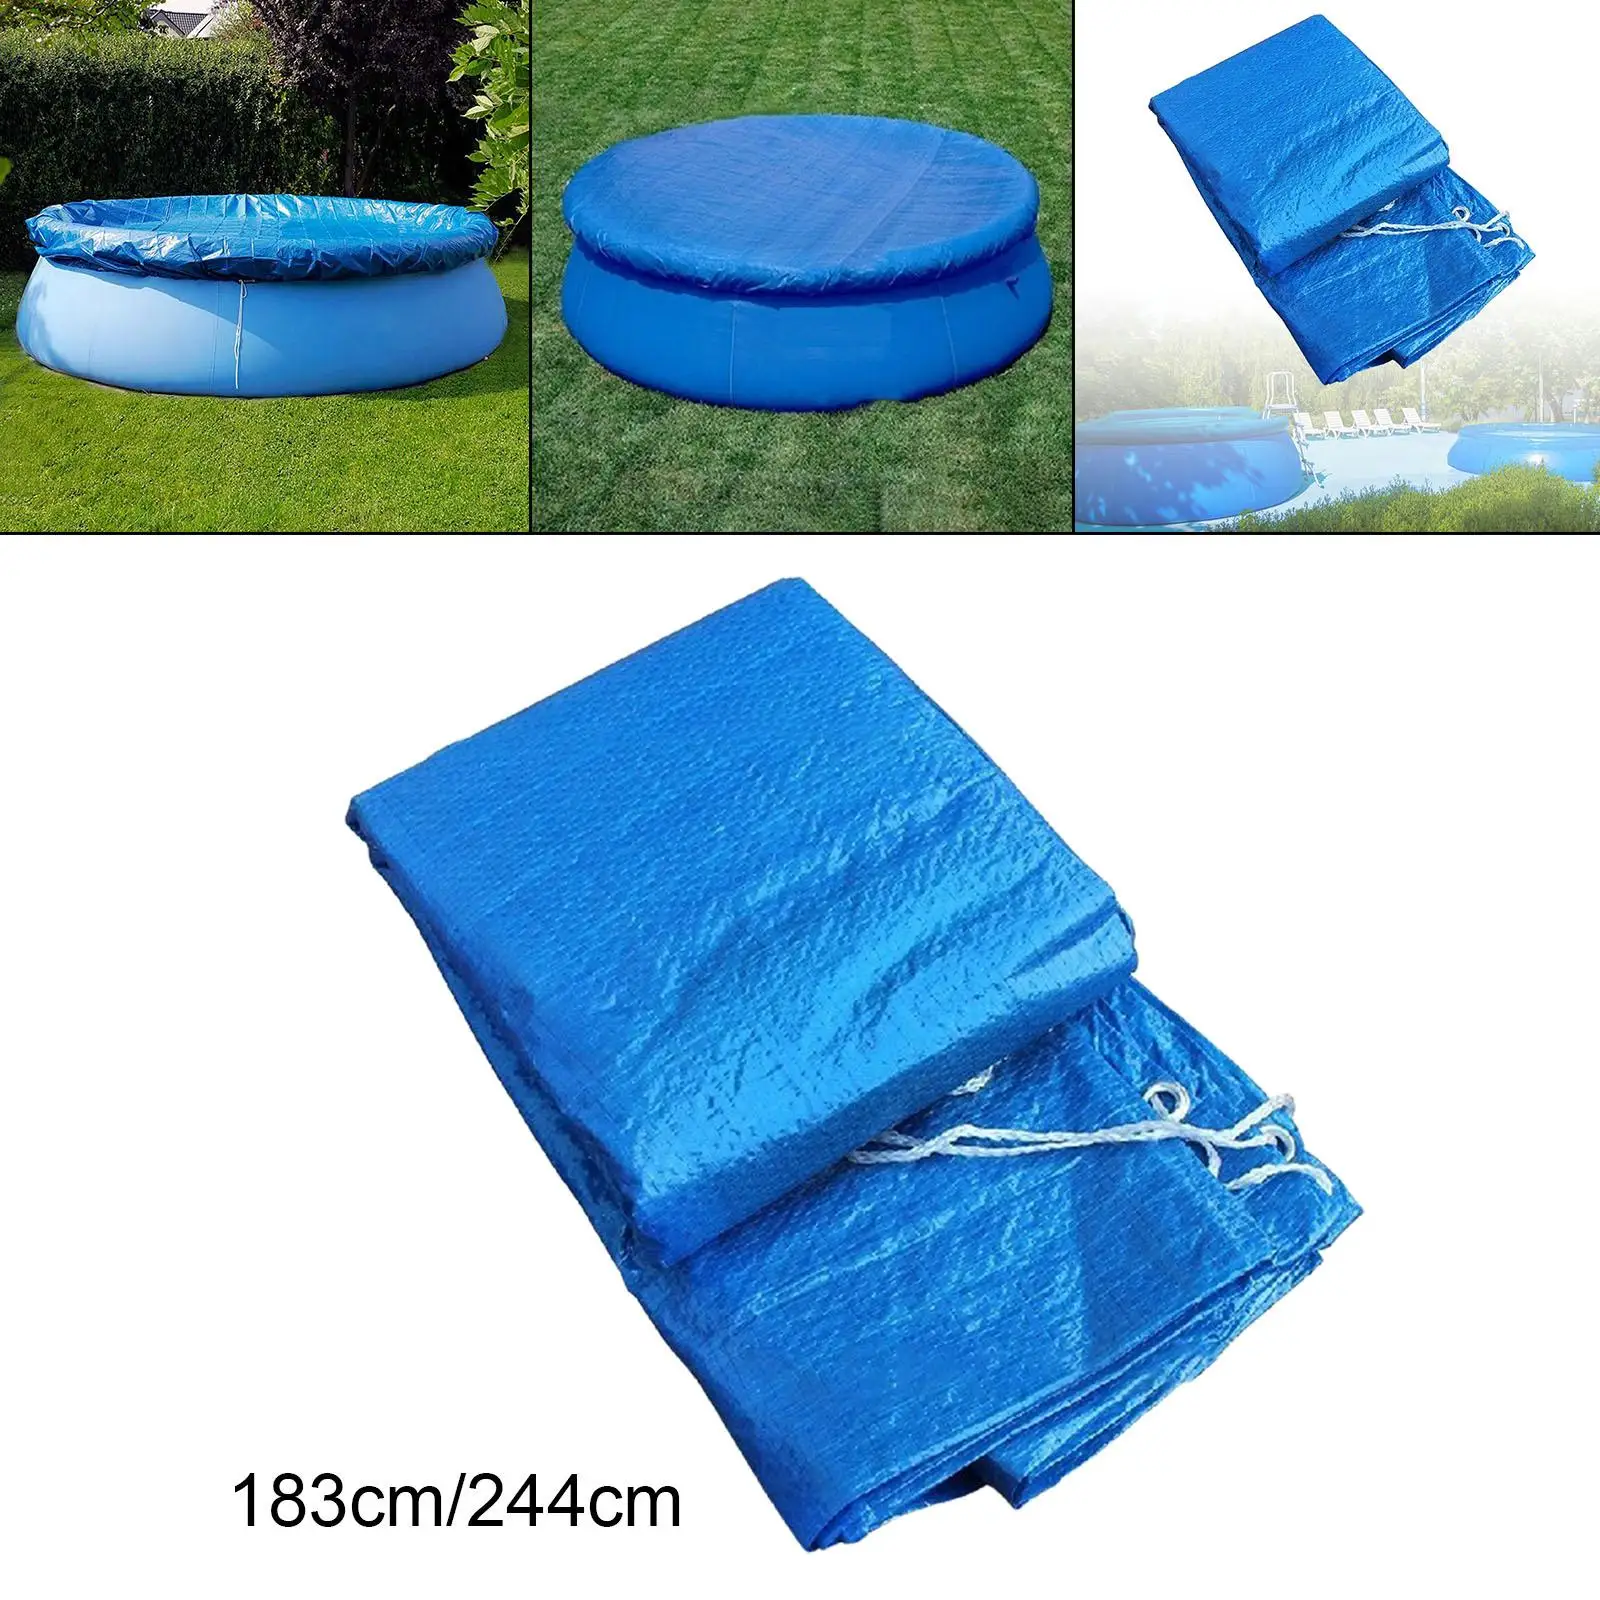 Swimming Pool Mat Round Pool Cover Waterproof Dustproof Mat for Sports